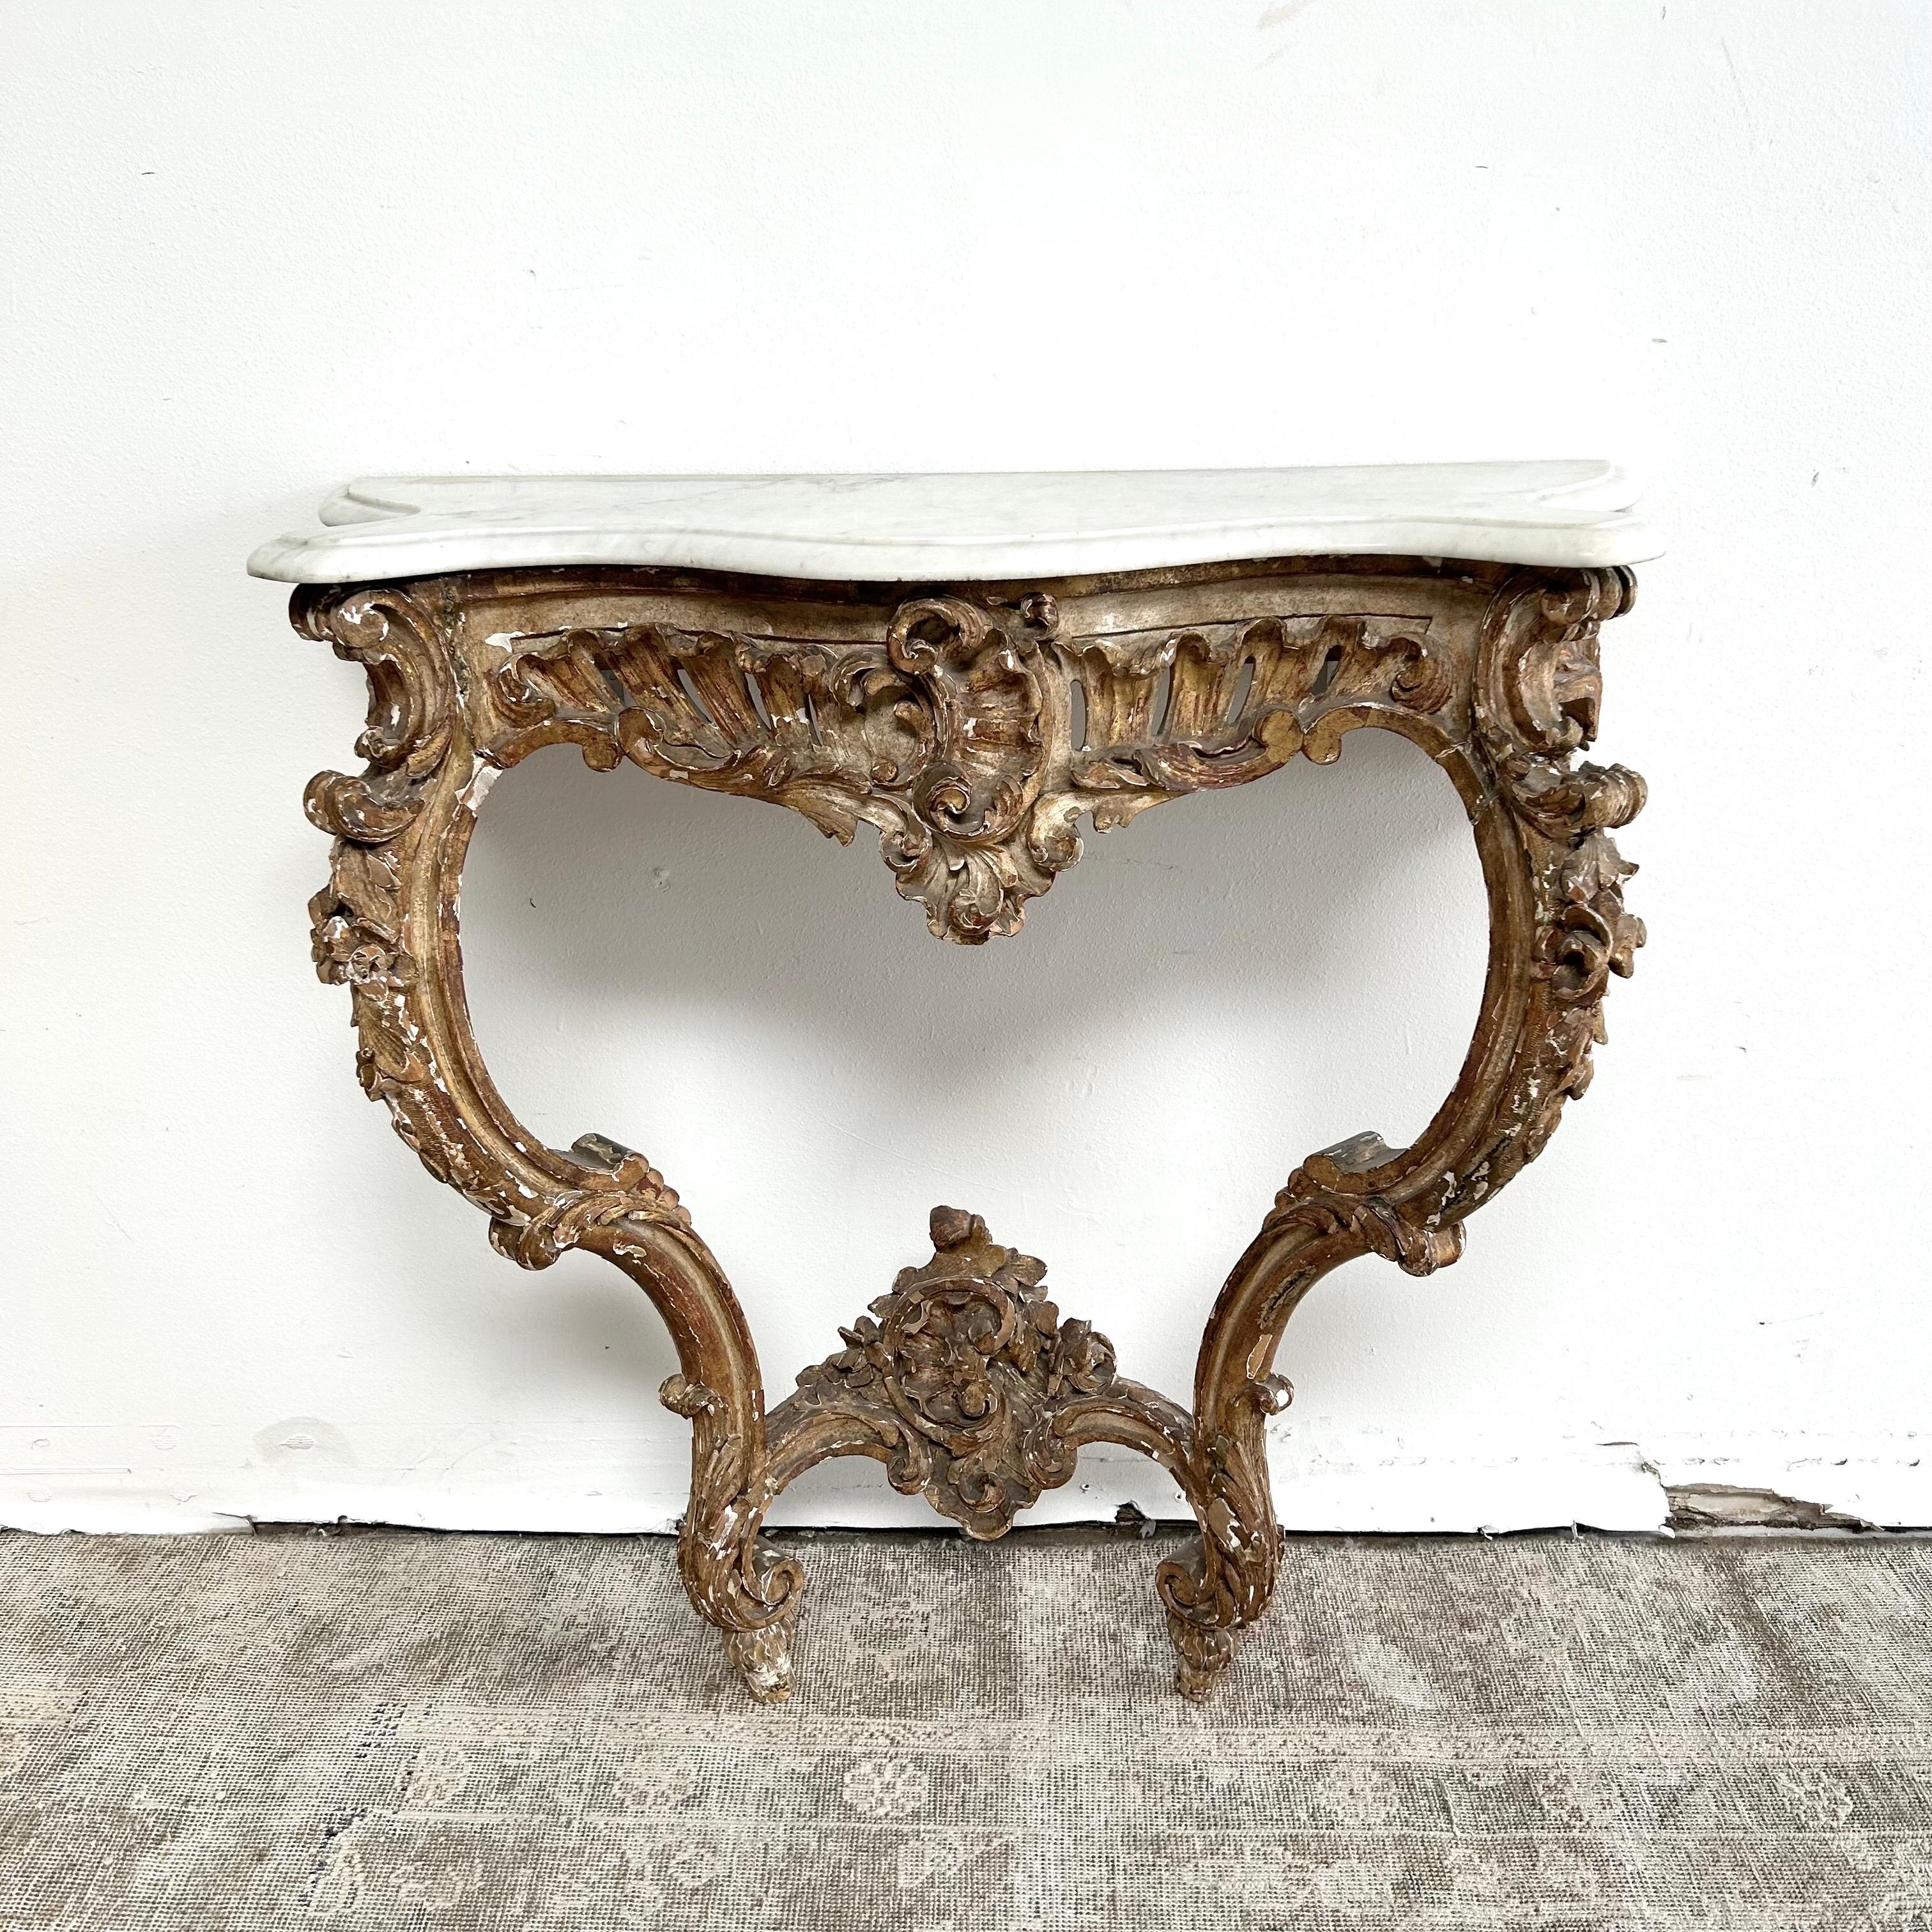 Antique wall console with marble top
Gilt wood, with heavy distressed patina.
This console is solid and sturdy, sold as is with repairs.
The table shows signs of repairs at seams, this has been done well, the base is solid and sturdy.
The marble